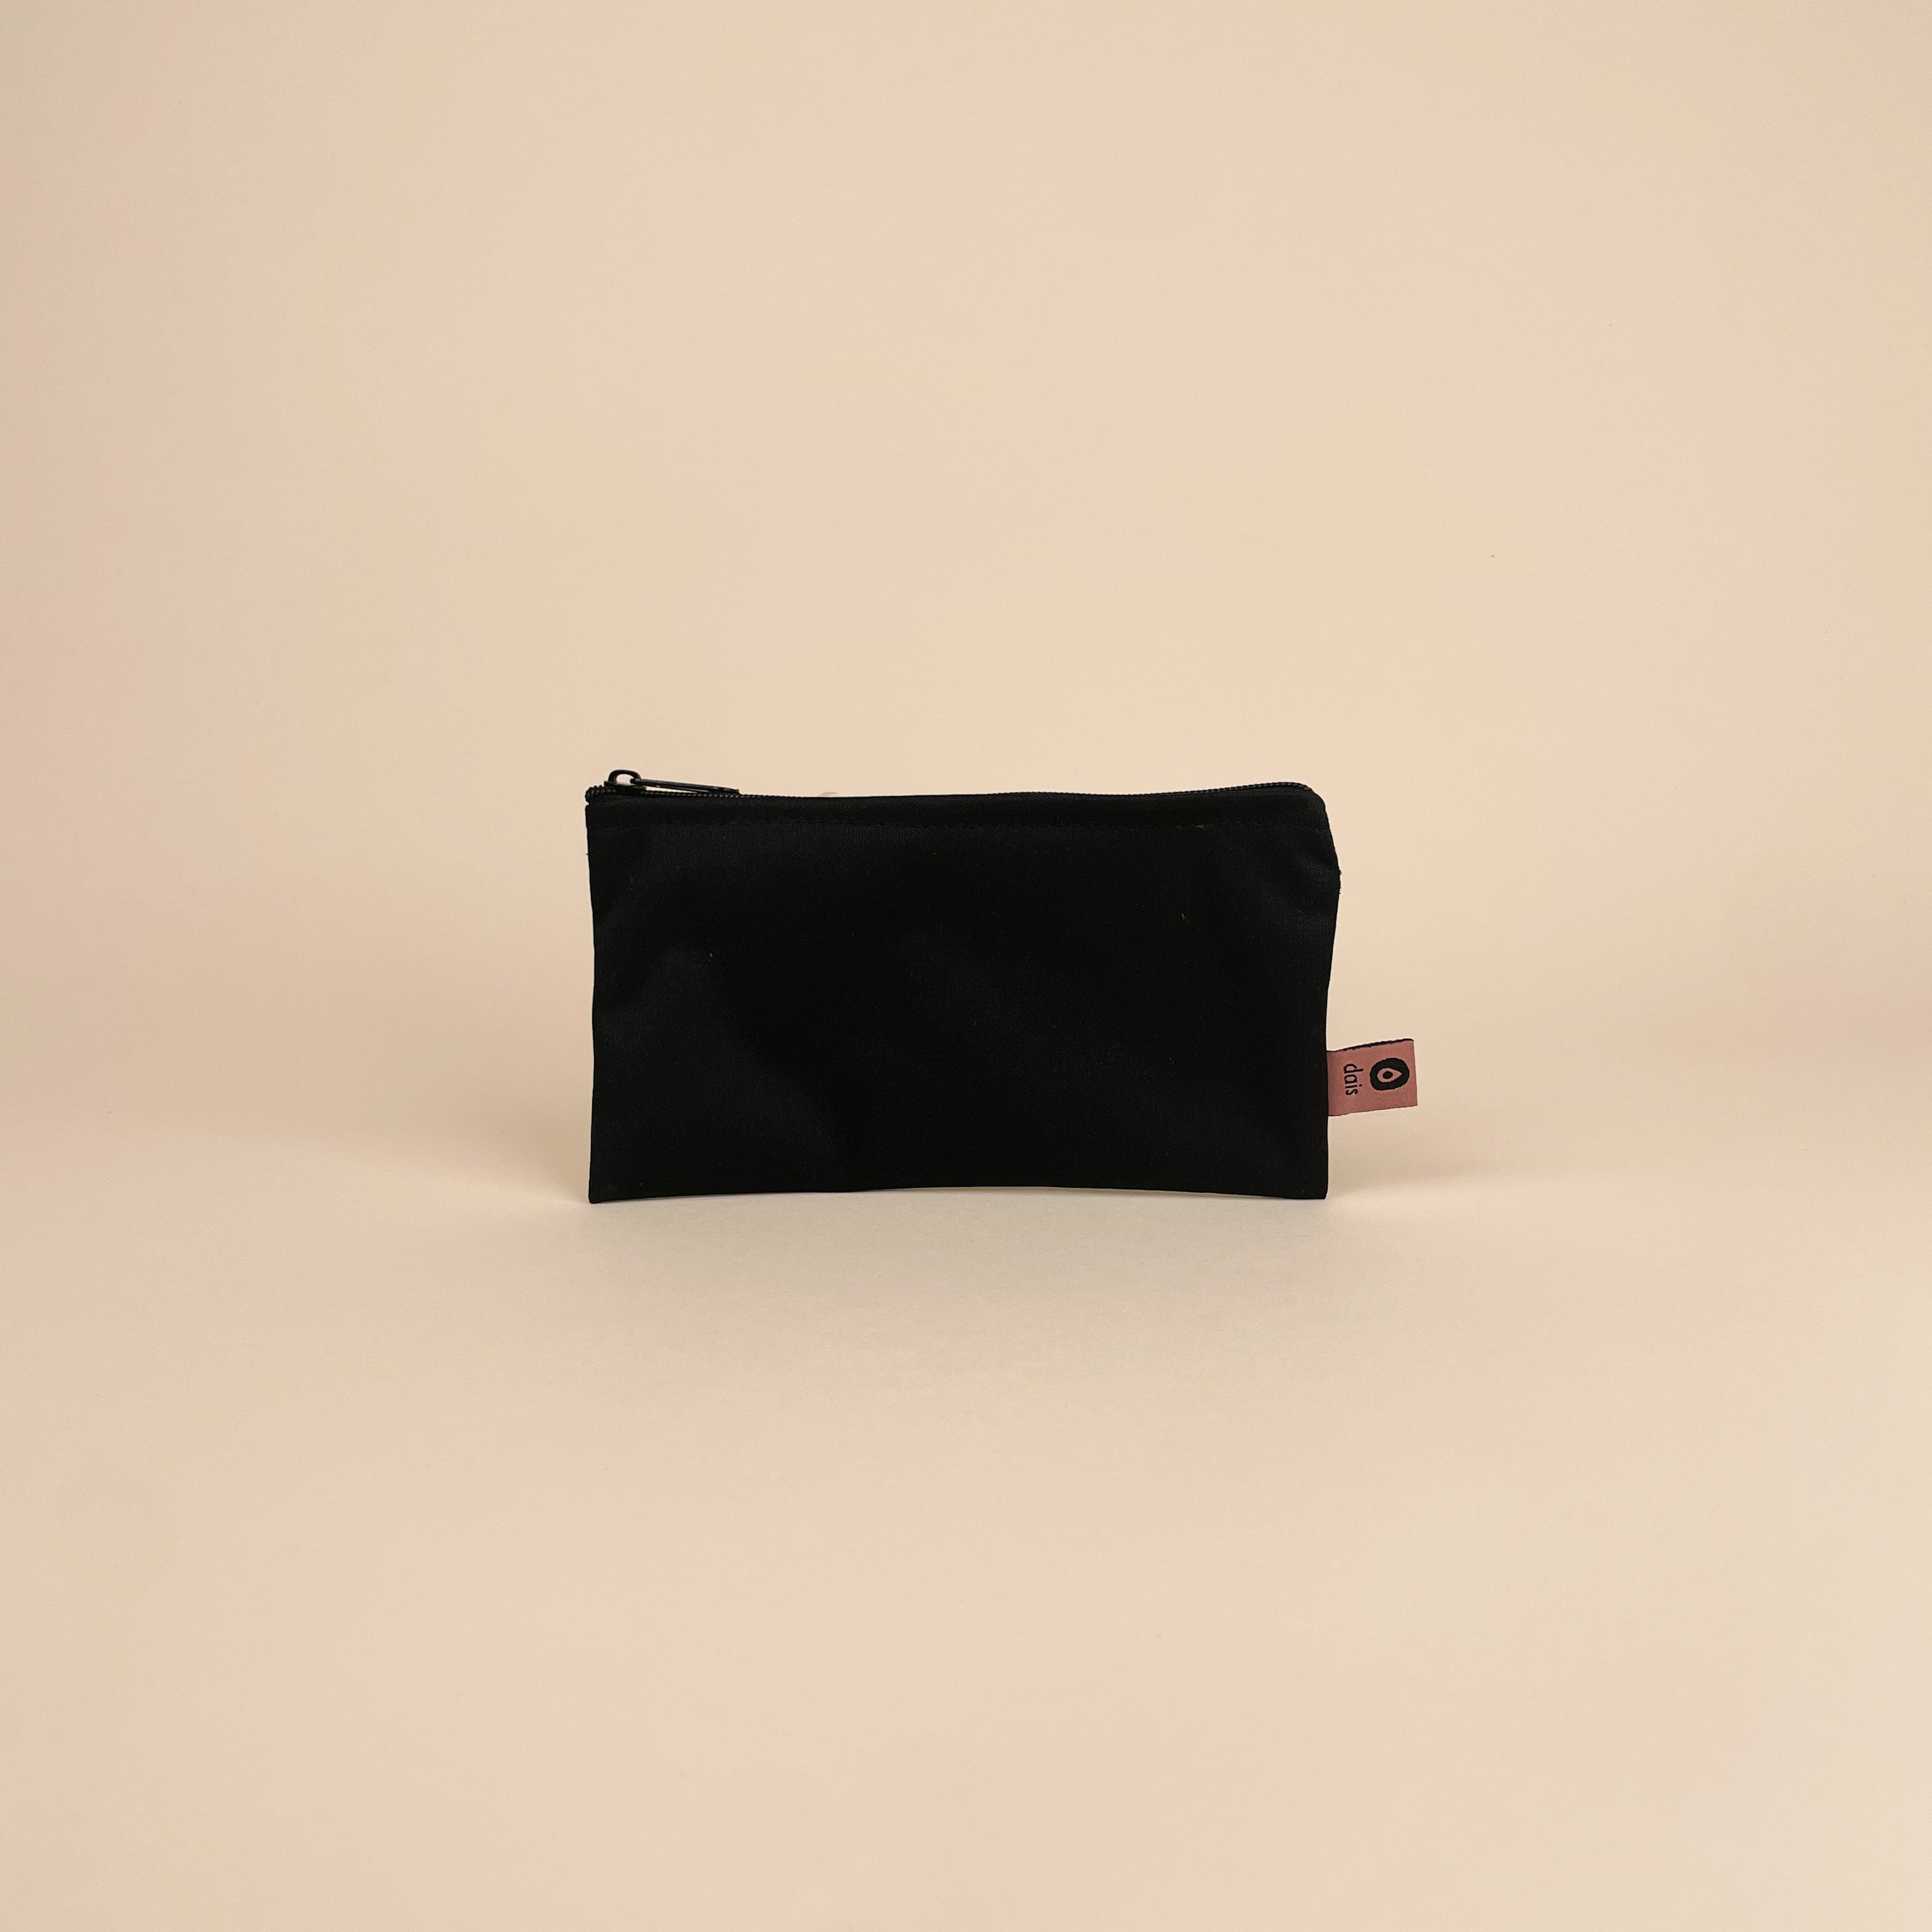 dais wetbag in black designed to use to hold dais period underwear. 